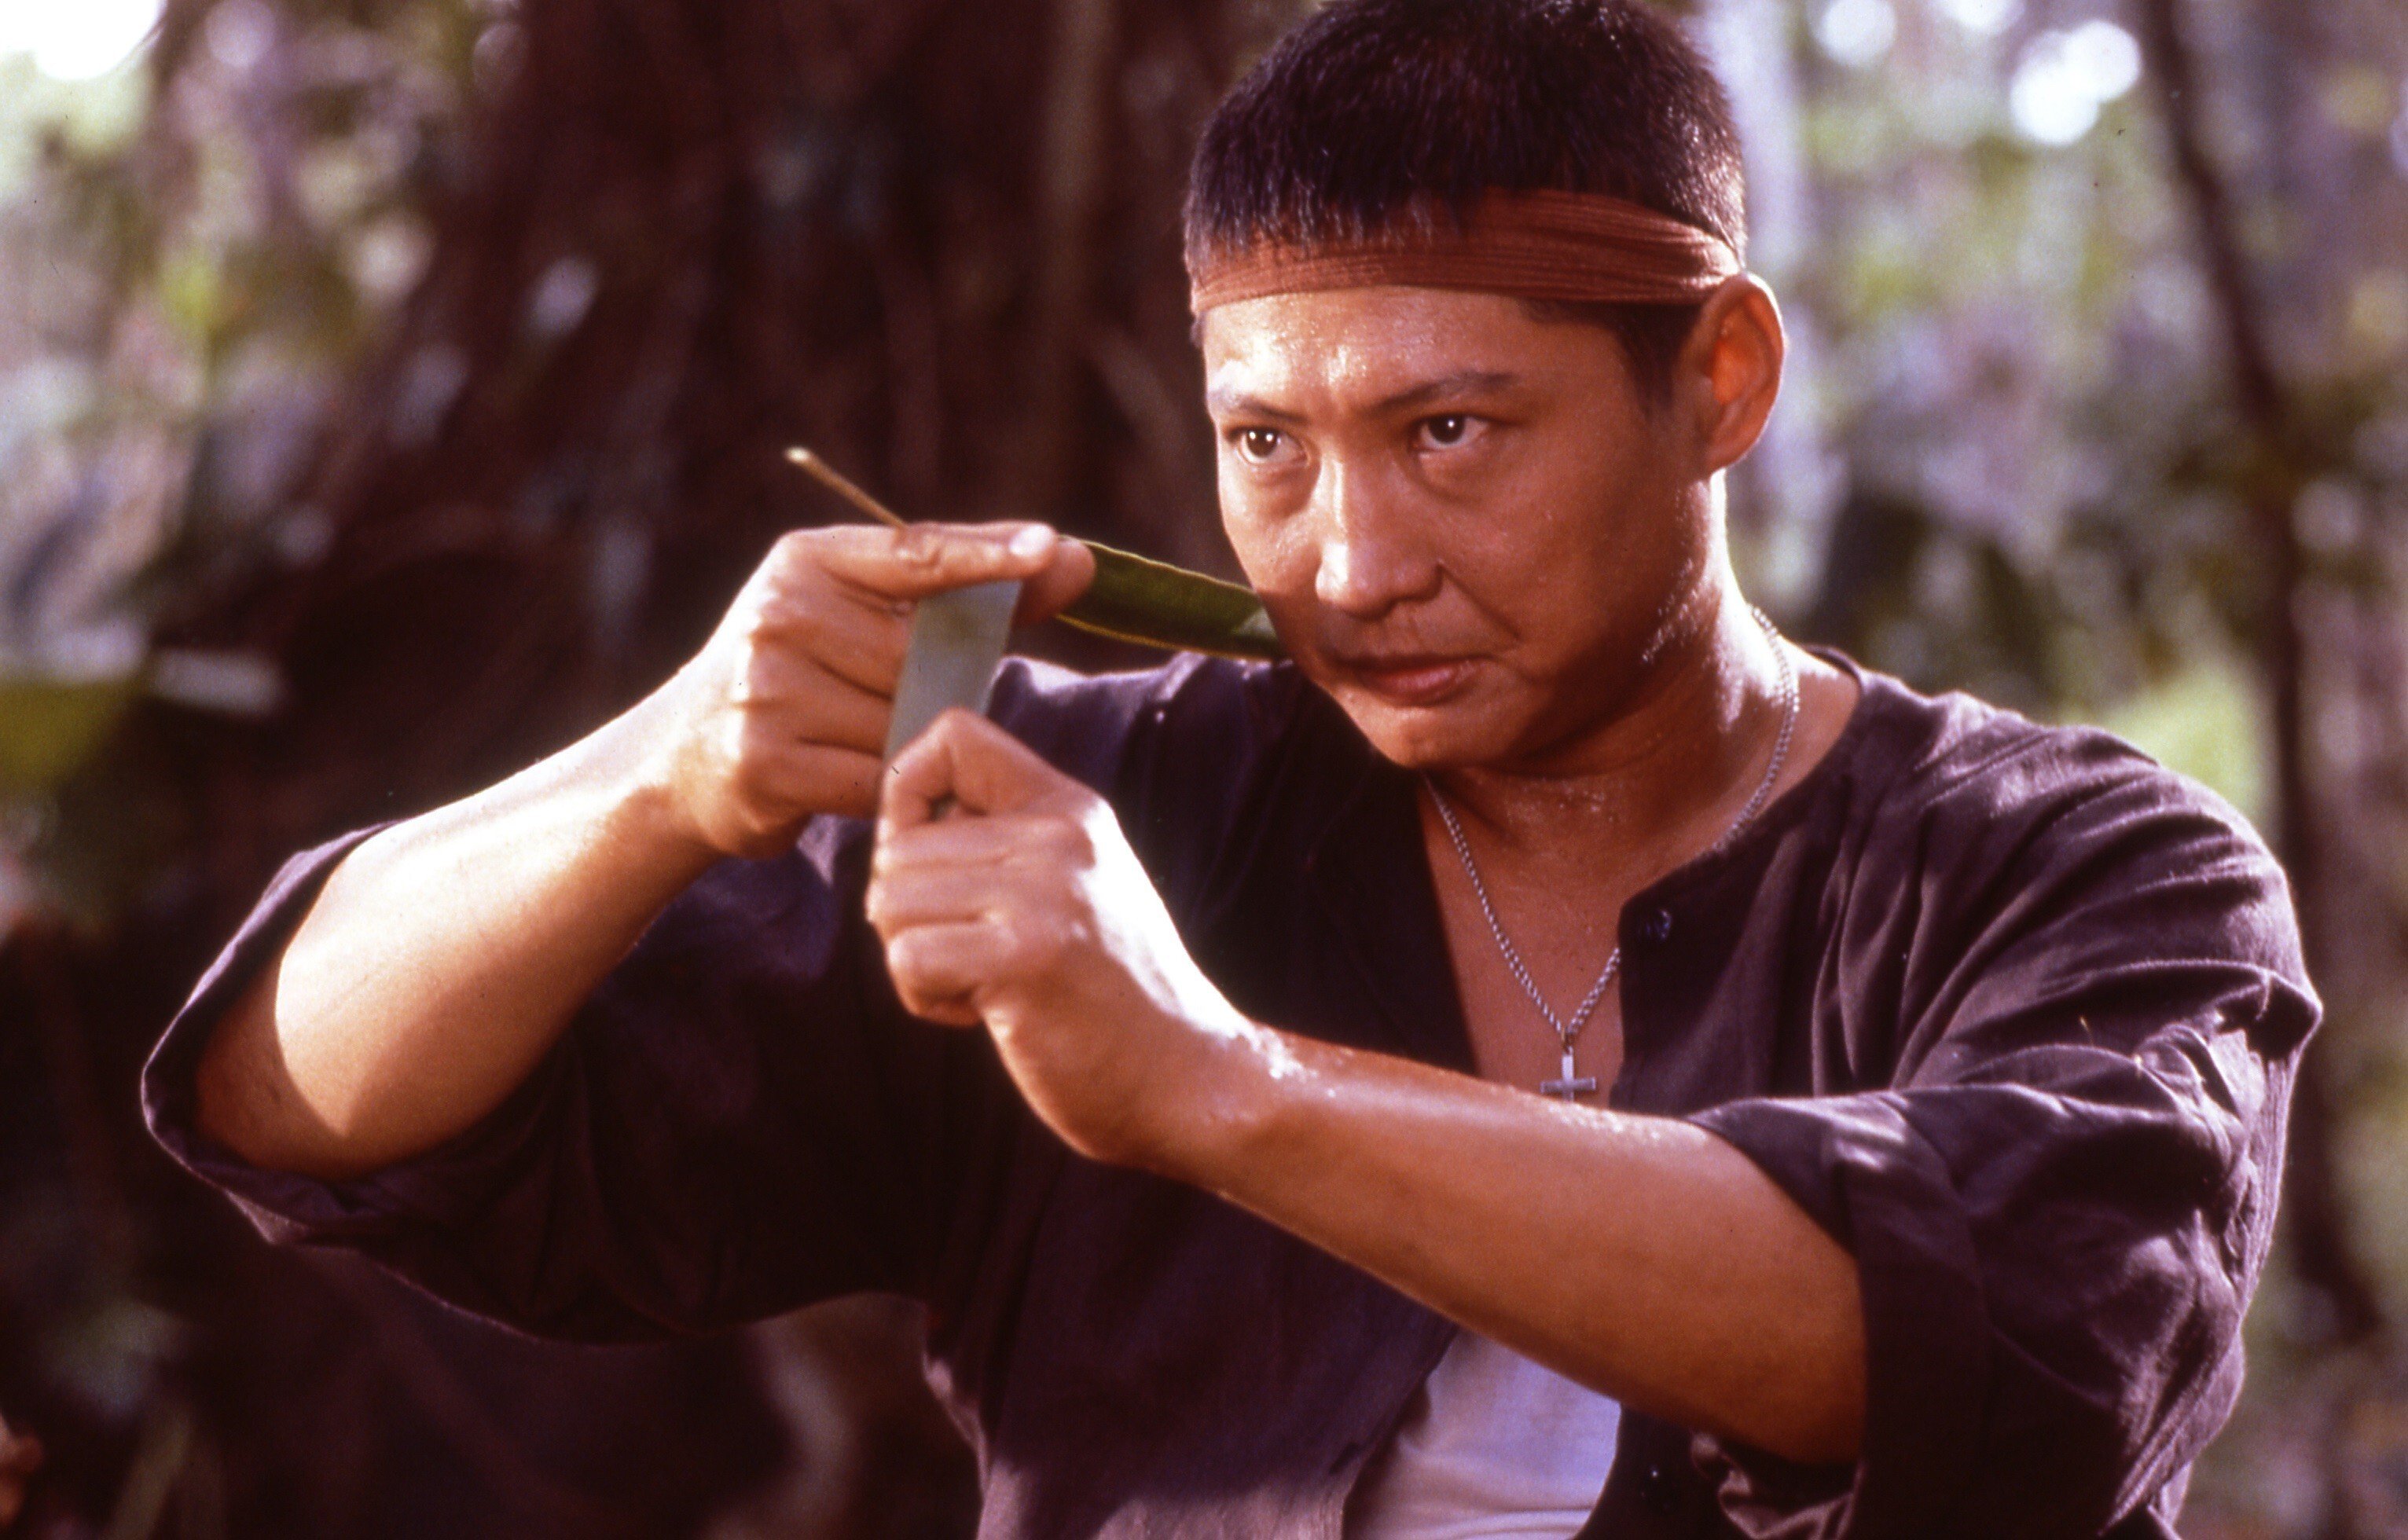 Sammo Hung's 10 best films ranked, from Pedicab Driver to